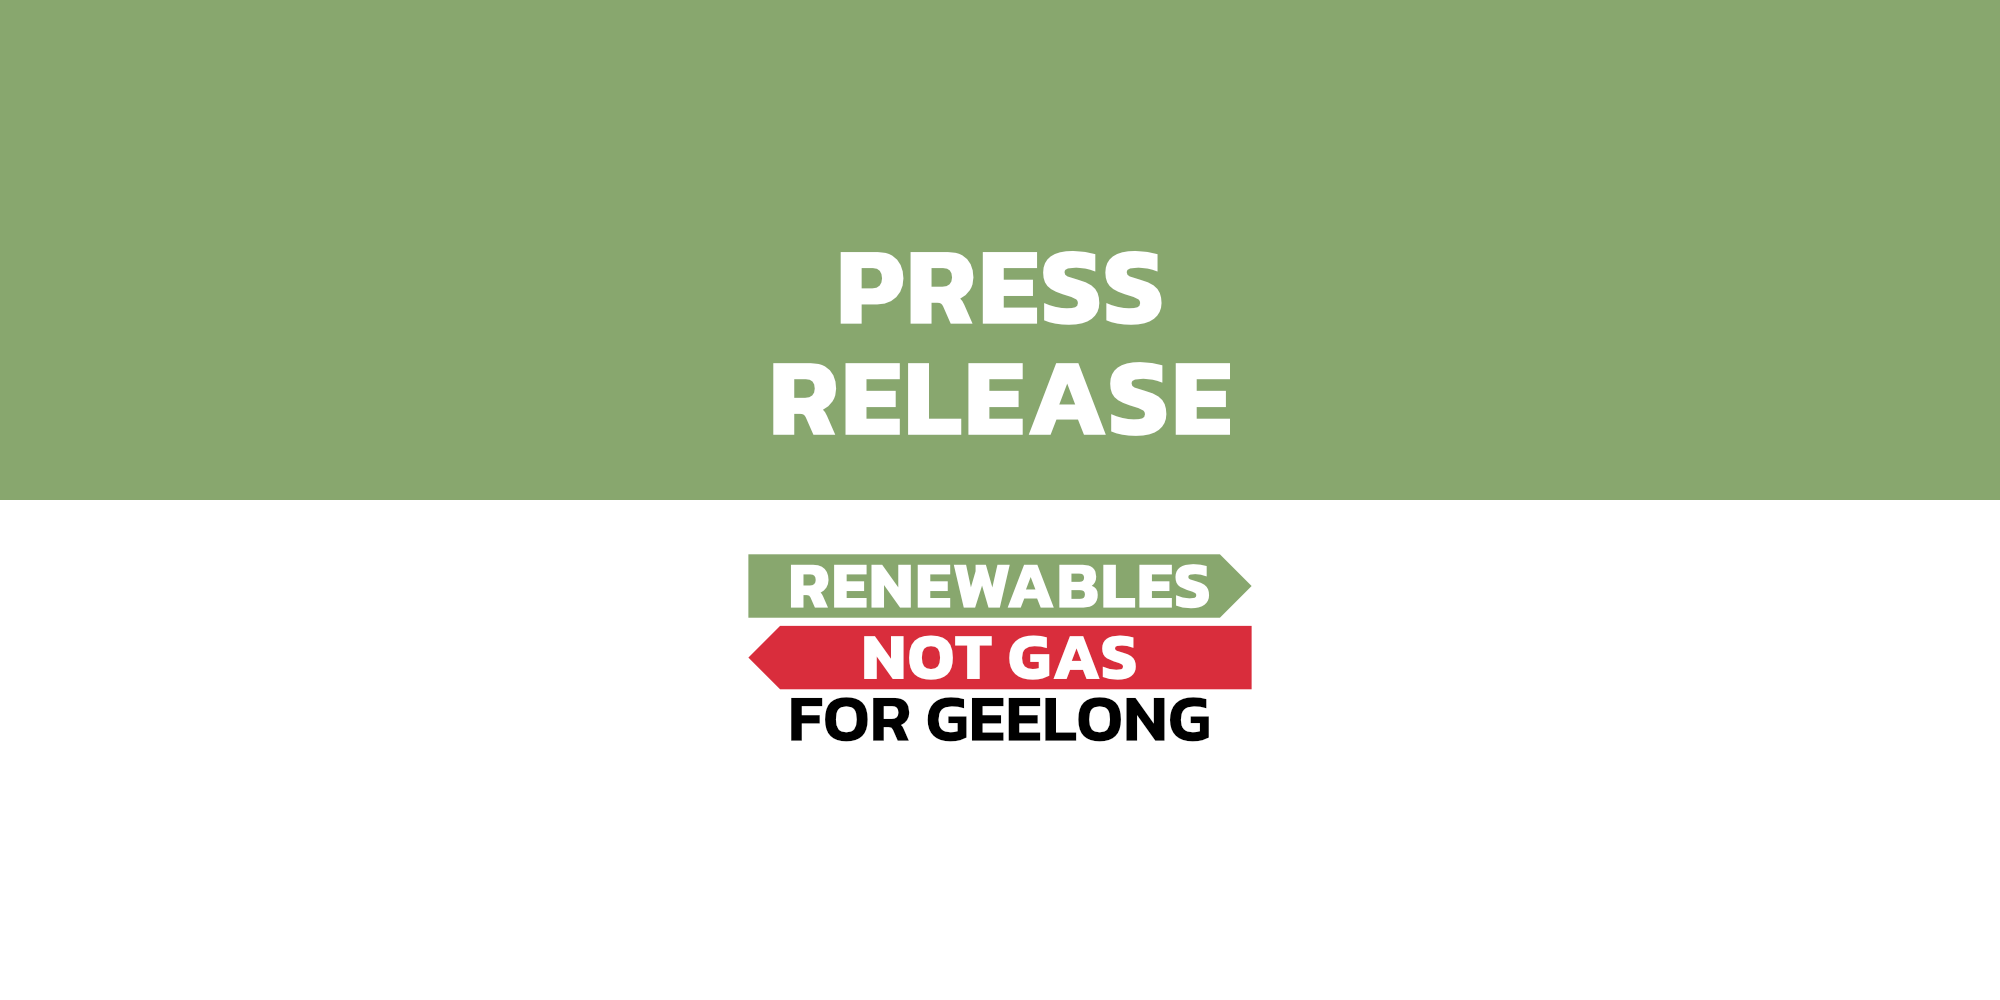 Featured image for “Video Highlights Dangers to Geelong and Peninsula Communities of Transporting LNG”